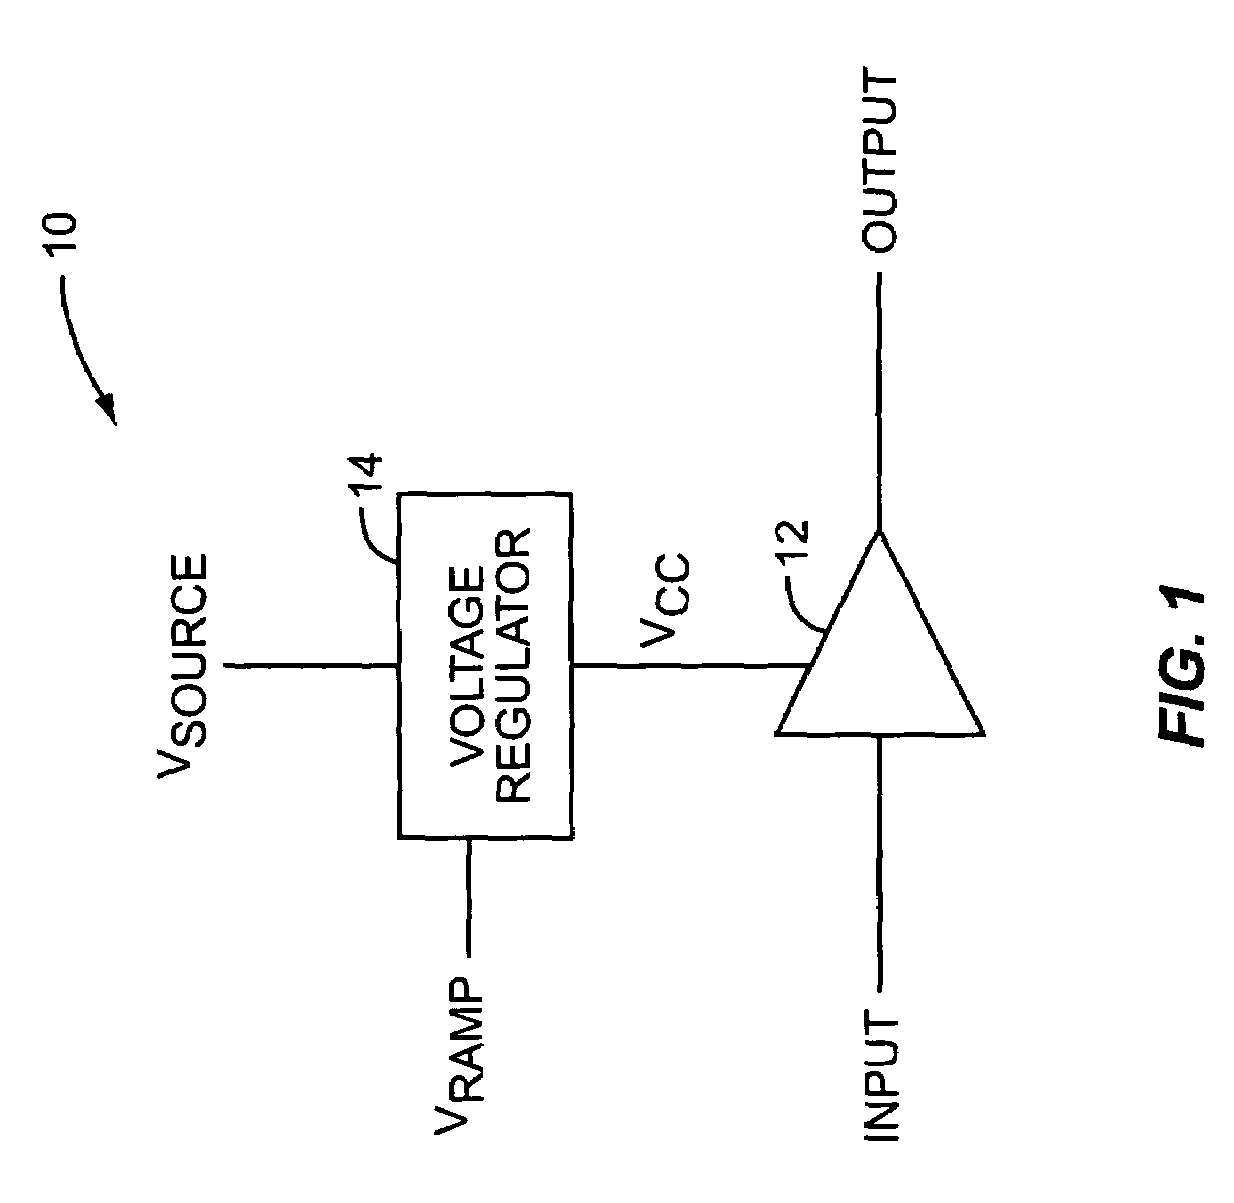 Temperature compensated power amplifier power control